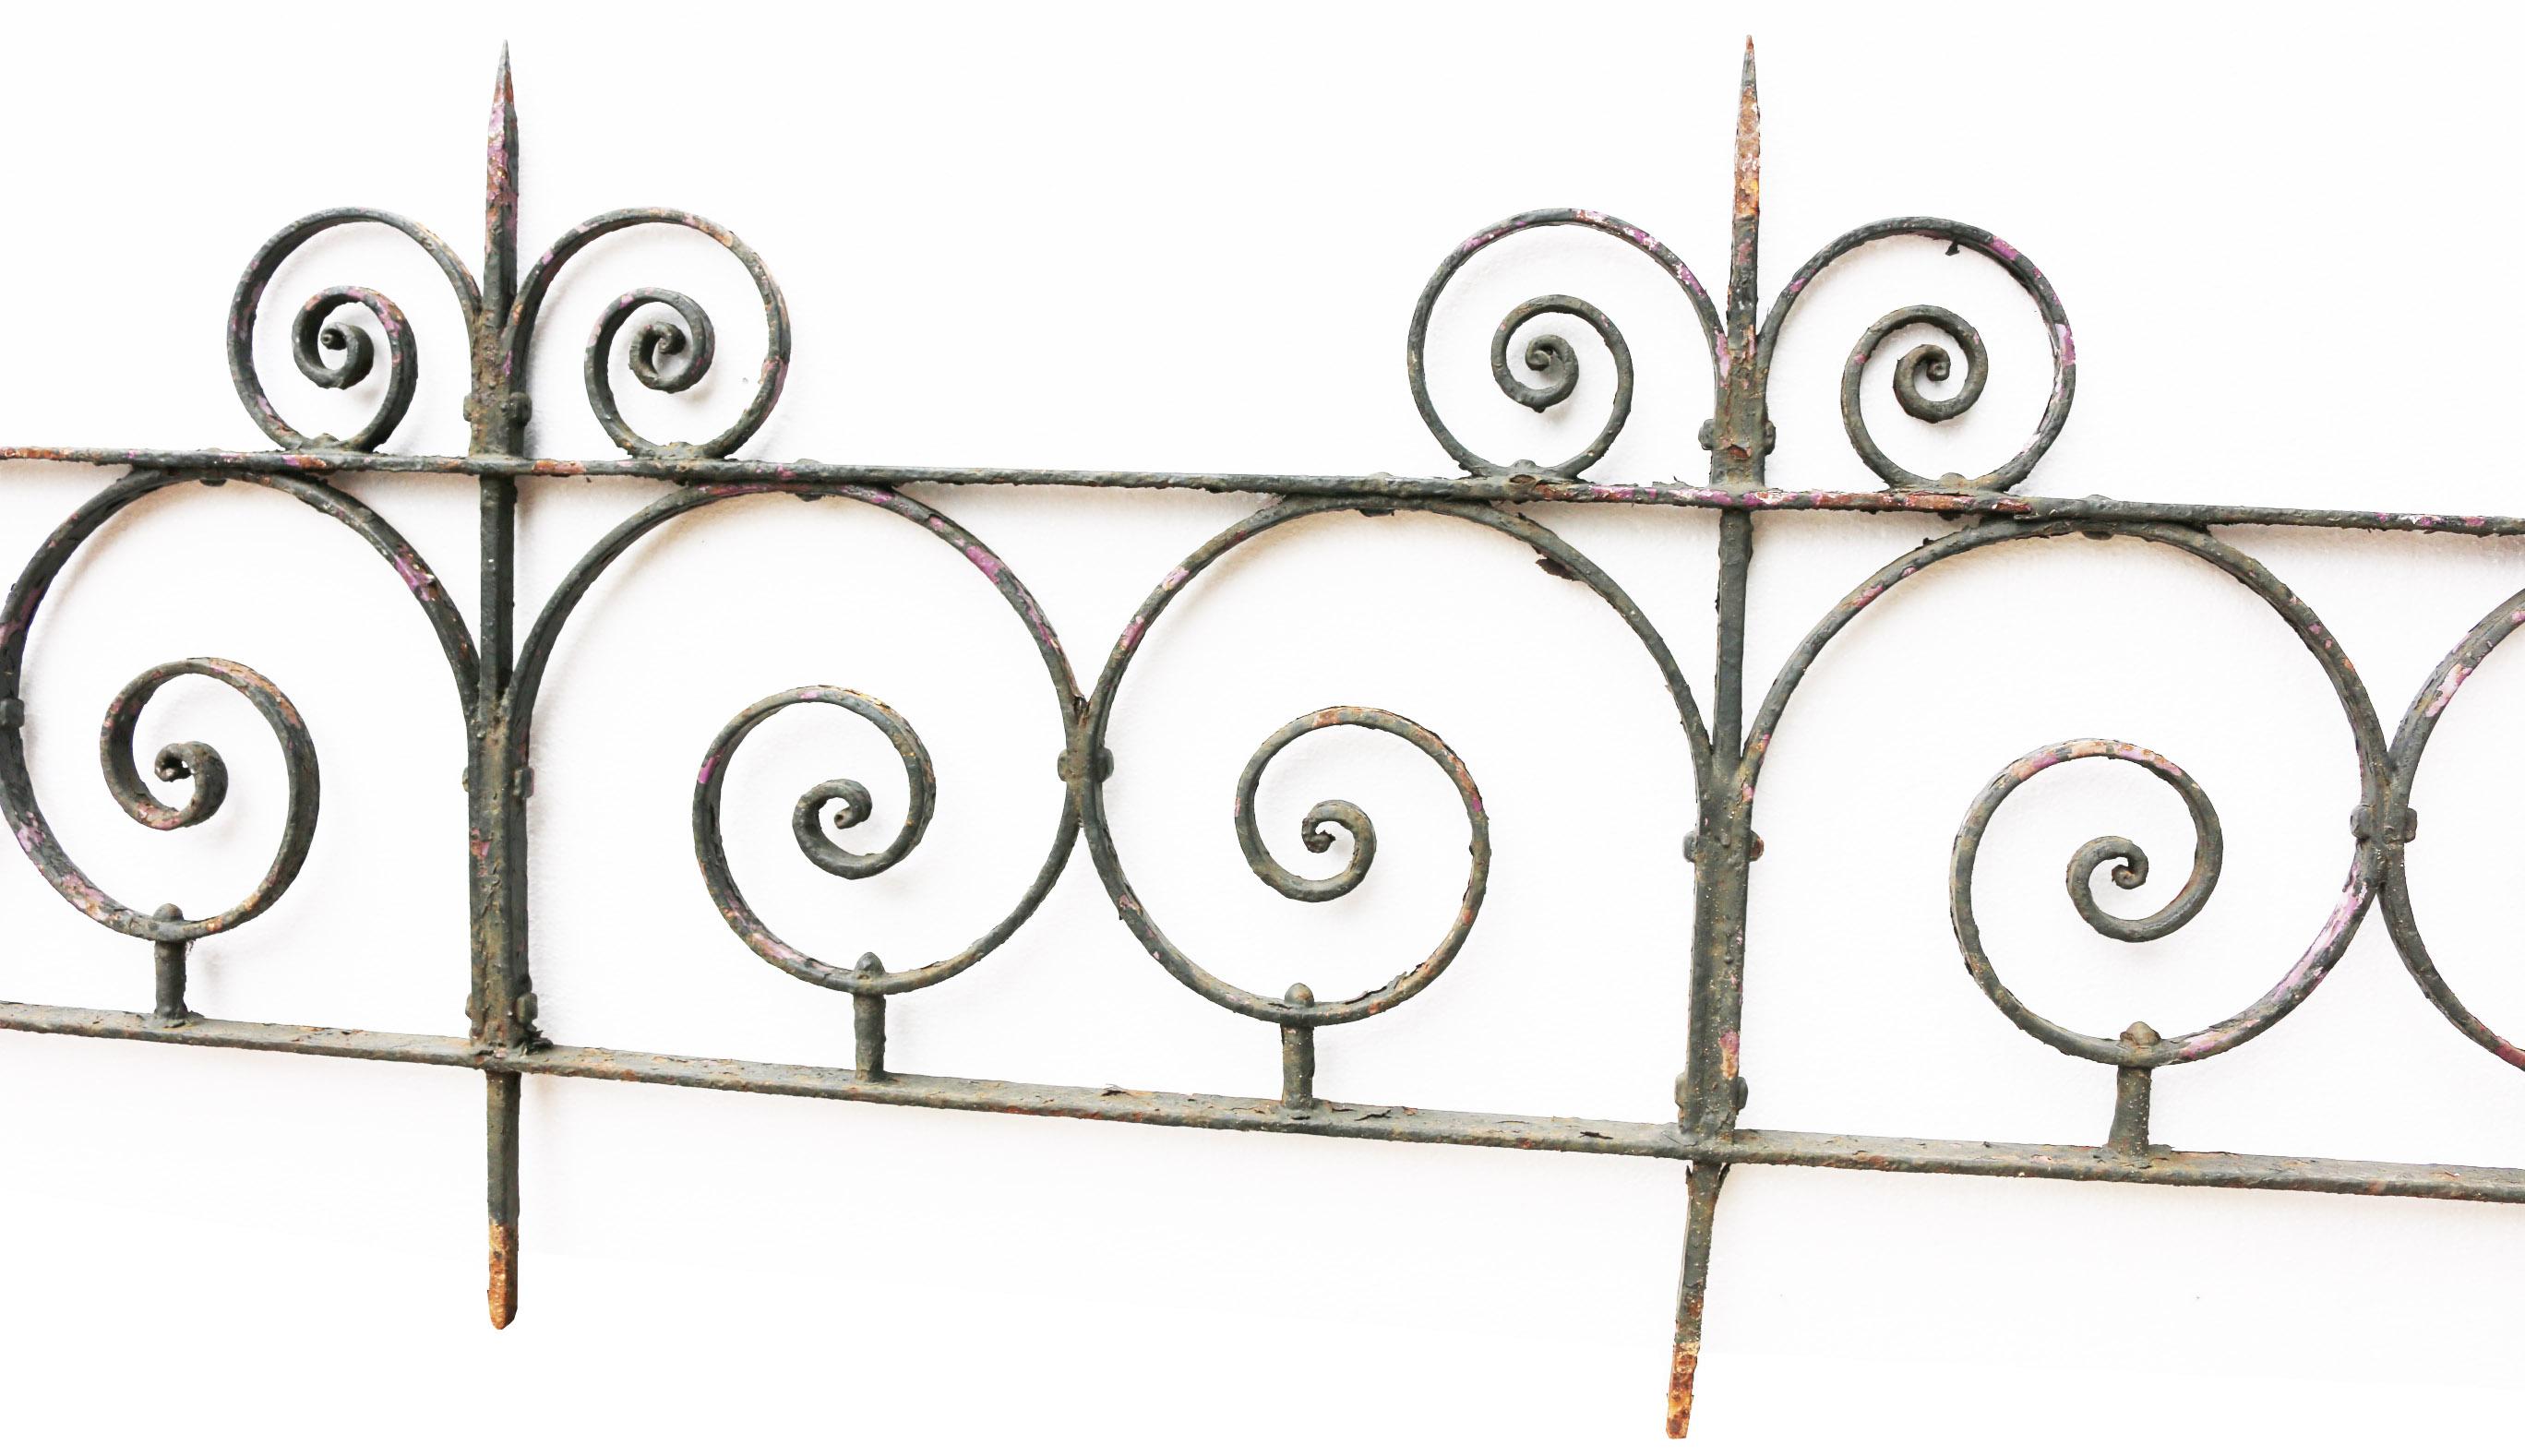 Wrought Iron Side Gate, Post and Railing In Good Condition For Sale In Wormelow, Herefordshire